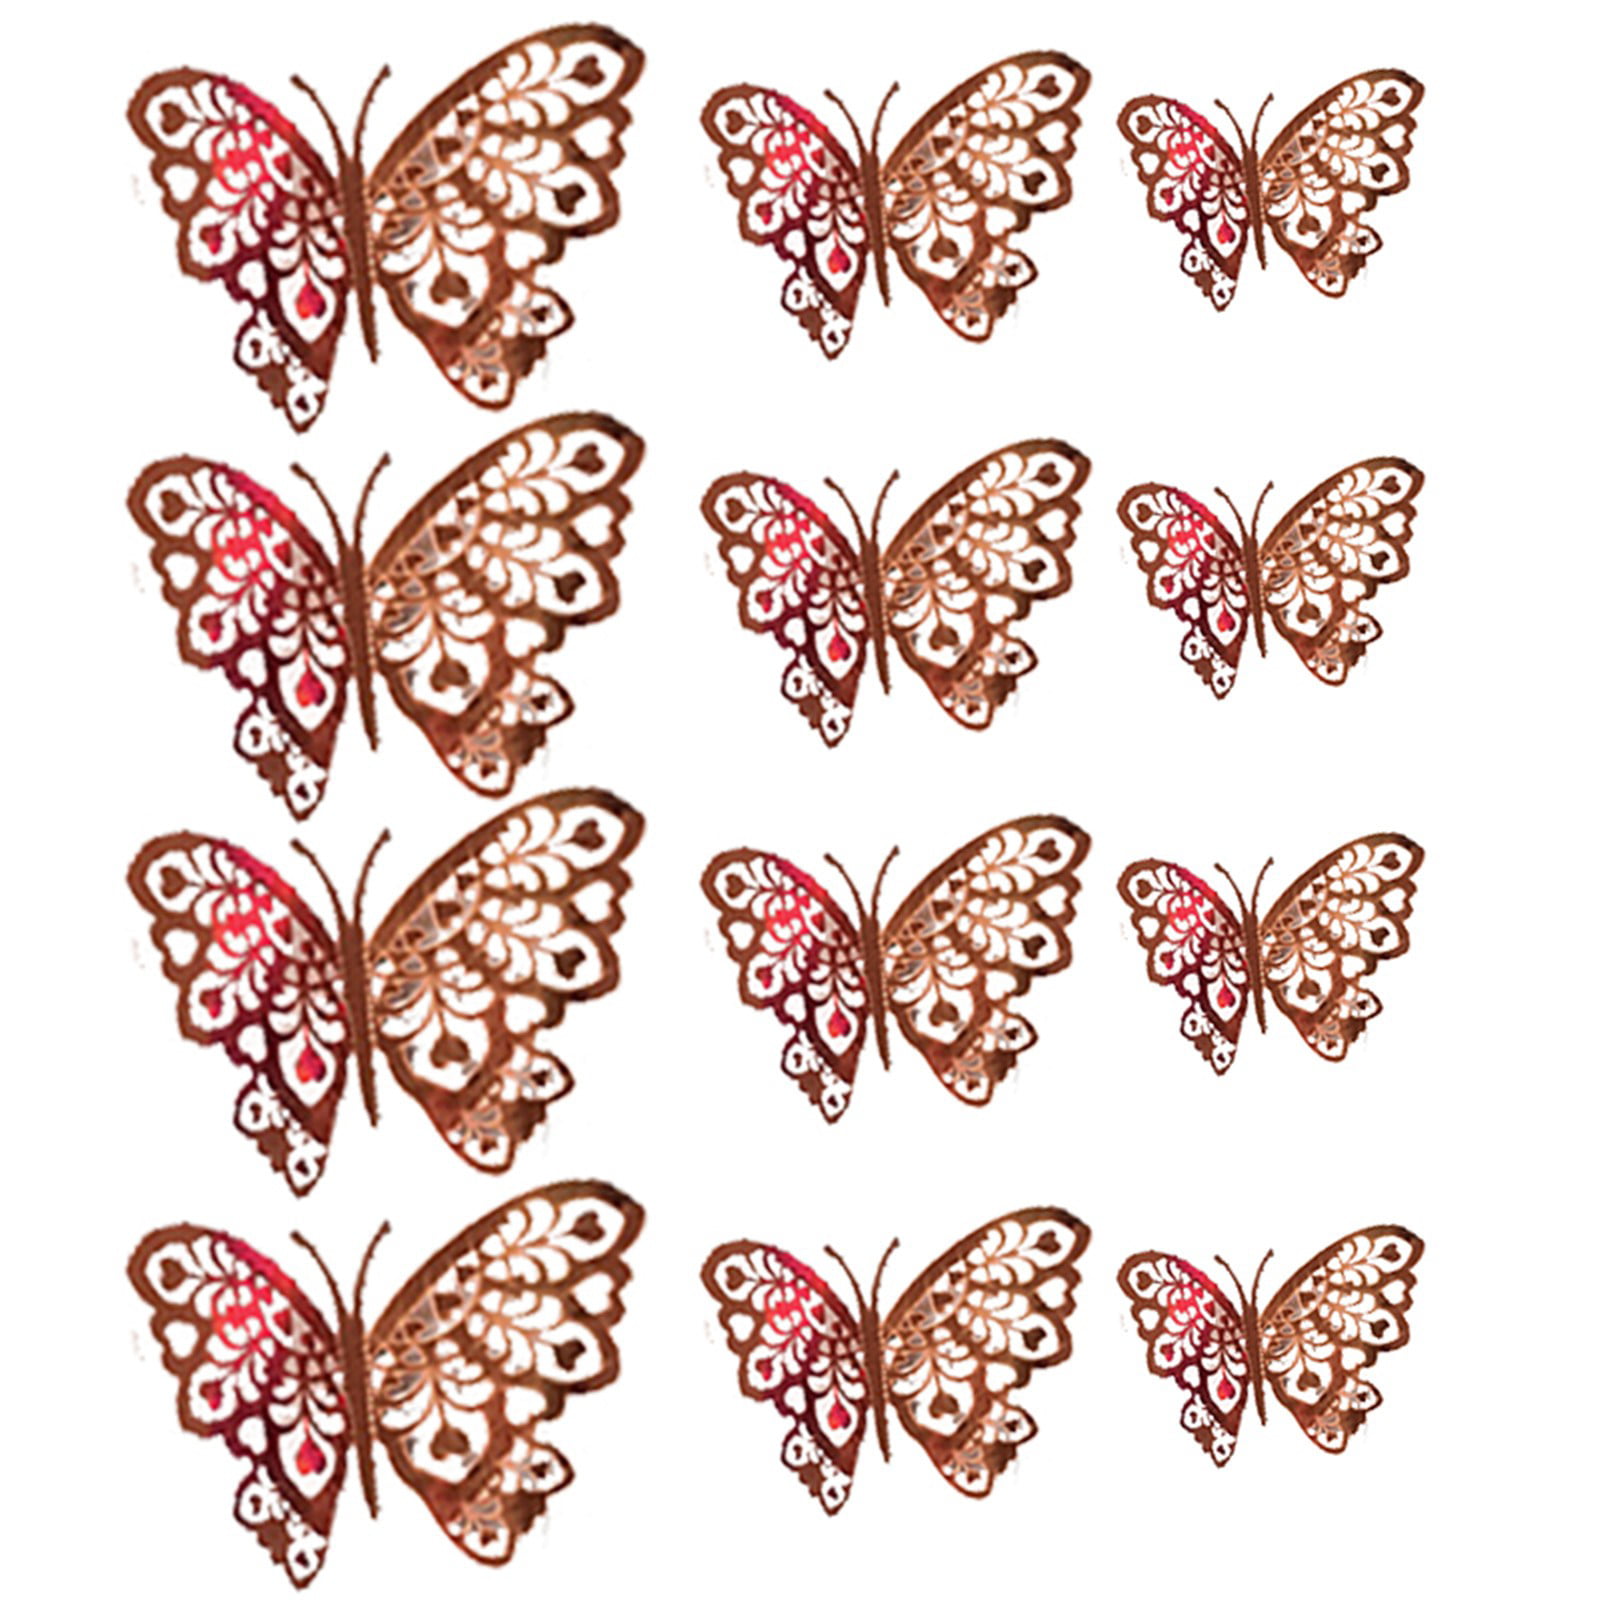 150pcs Glitter Butterfly Embellishments for DIY Wedding Party Decor 3 Colors 